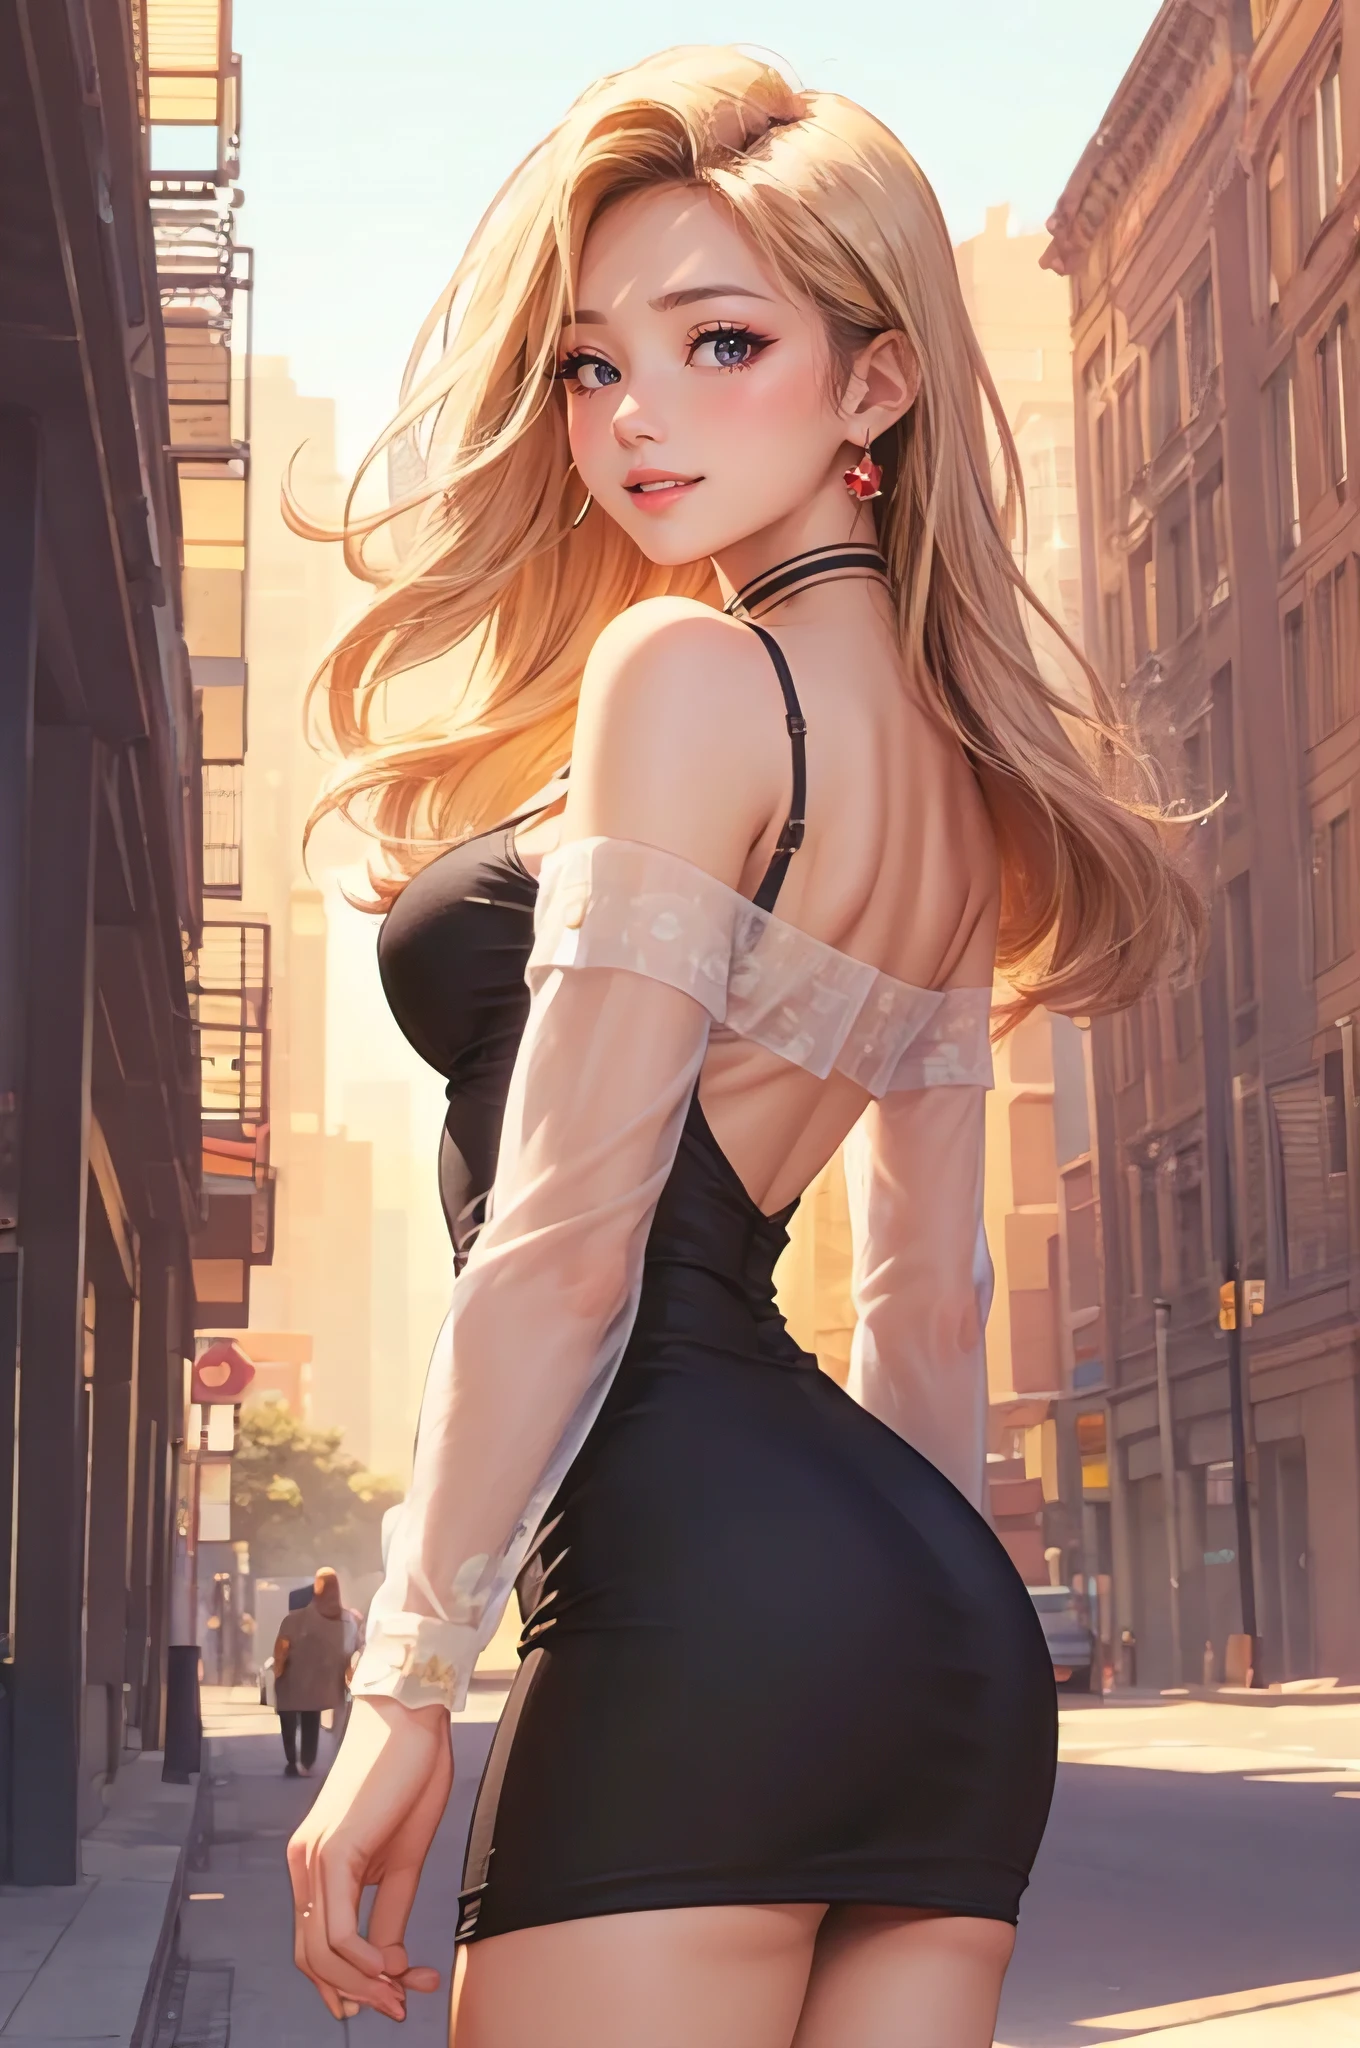 (best quality, masterpiece:1.2), perfect body, nice breasts, nice ass, big gorgeous eyes, full luscious lips, smile, parted lips, (bare back printed minidress), walking pose, city streets, retrofuturistic, clean lines, vibrant, perfect illustration